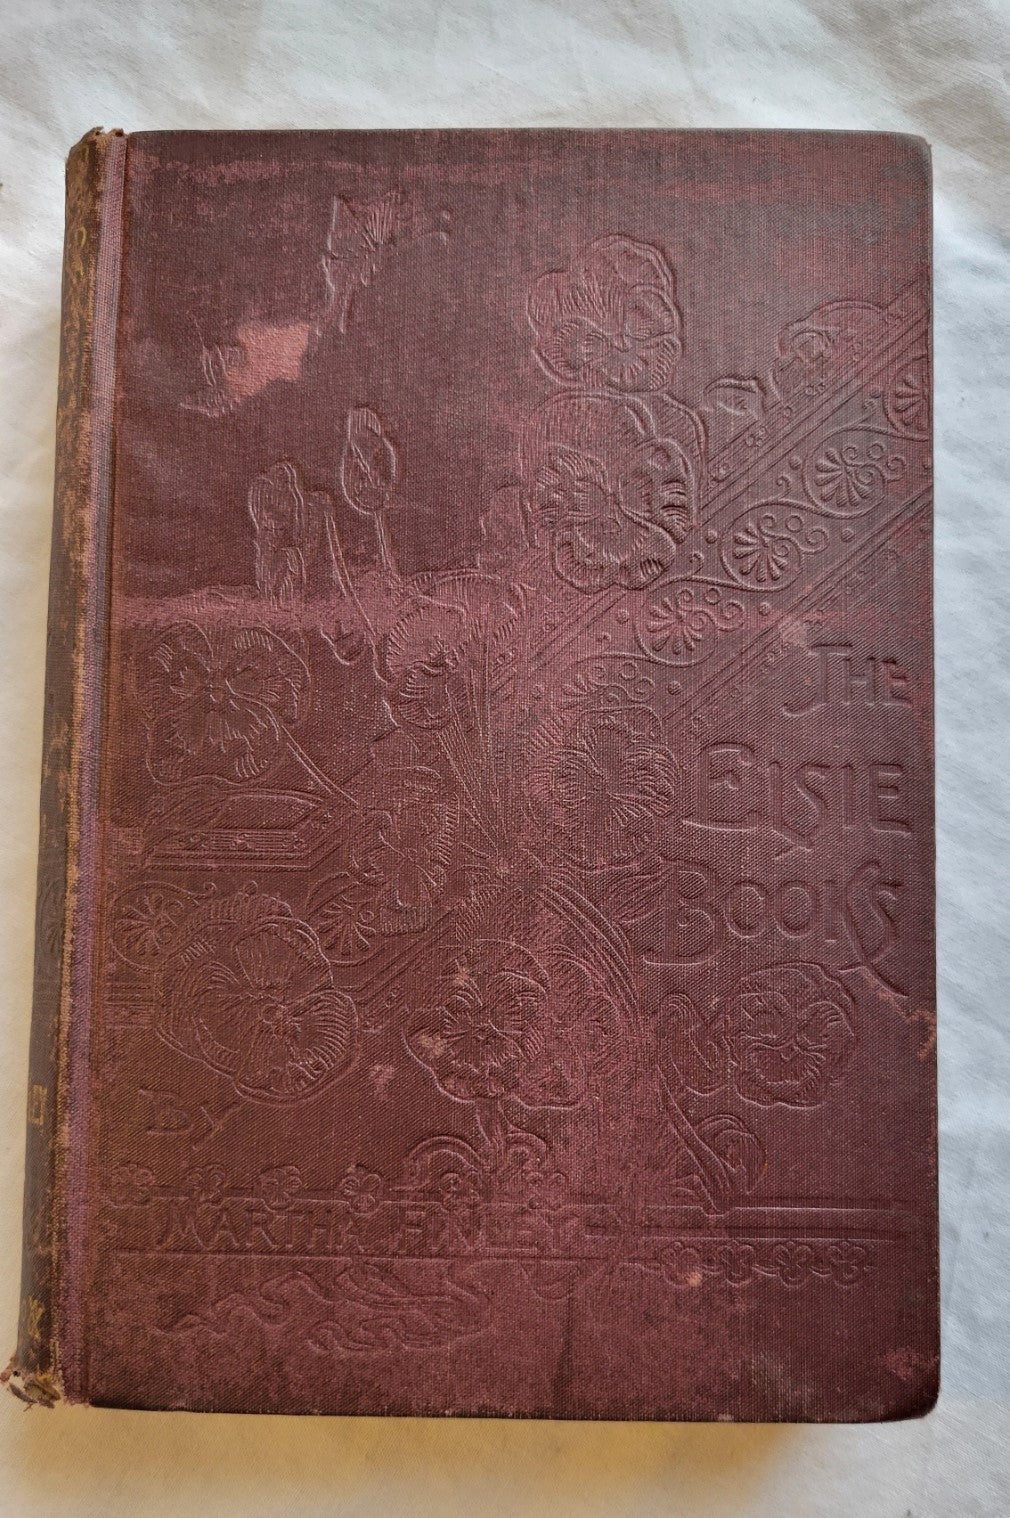 Antique book for sale "Grandmother Elsie" by Martha Finley, published by Dodd, Mead, & Company, copyright 1882.  This is the 8th book in the Elsie Dinsmore series.  View of front cover.